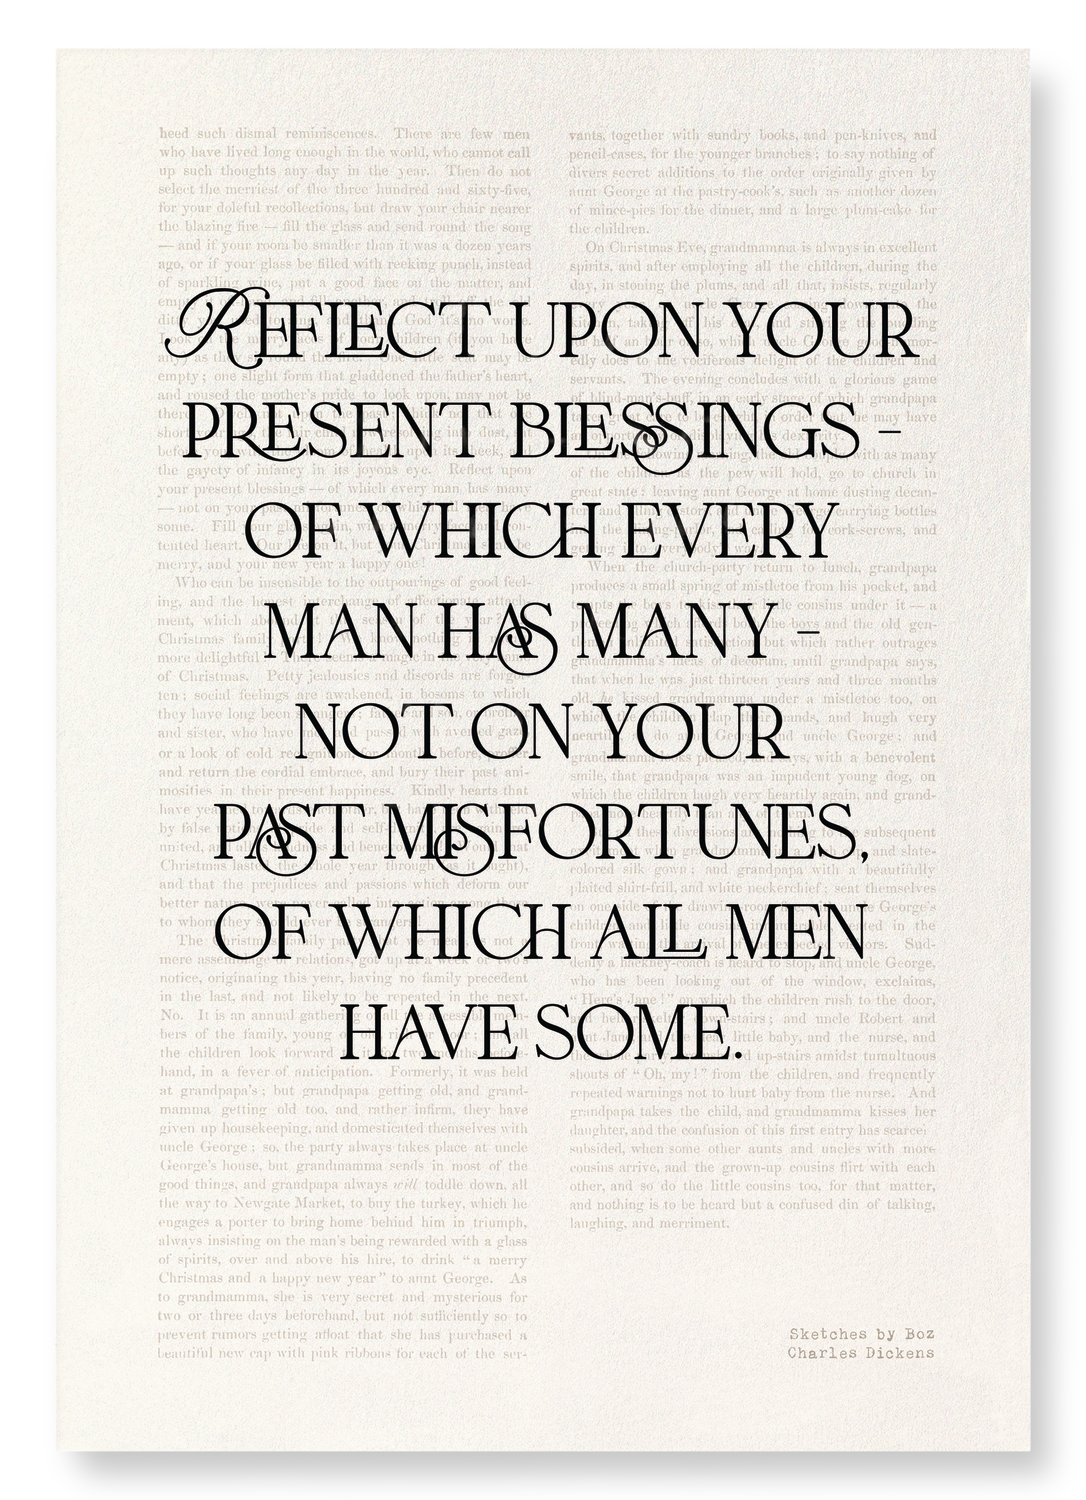 REFLECT UPON YOUR BLESSINGS (1836)